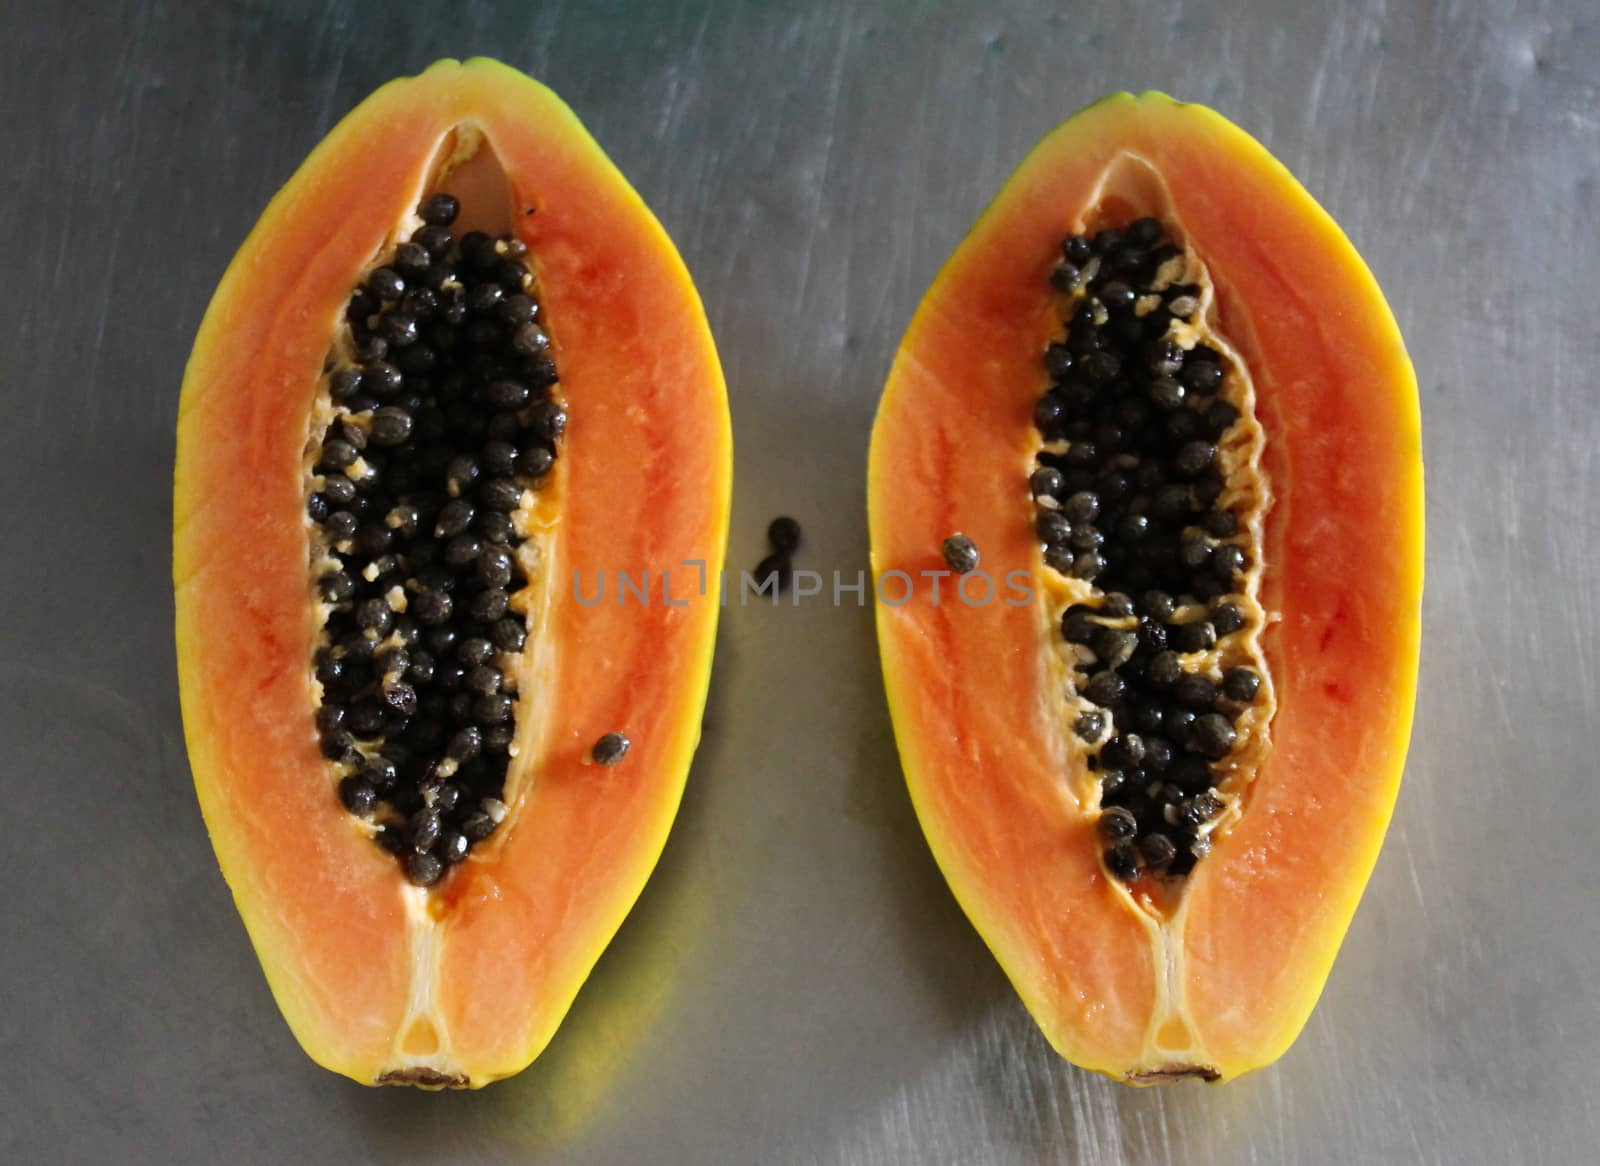 Two halves of papaya fruit on the kitchen table.